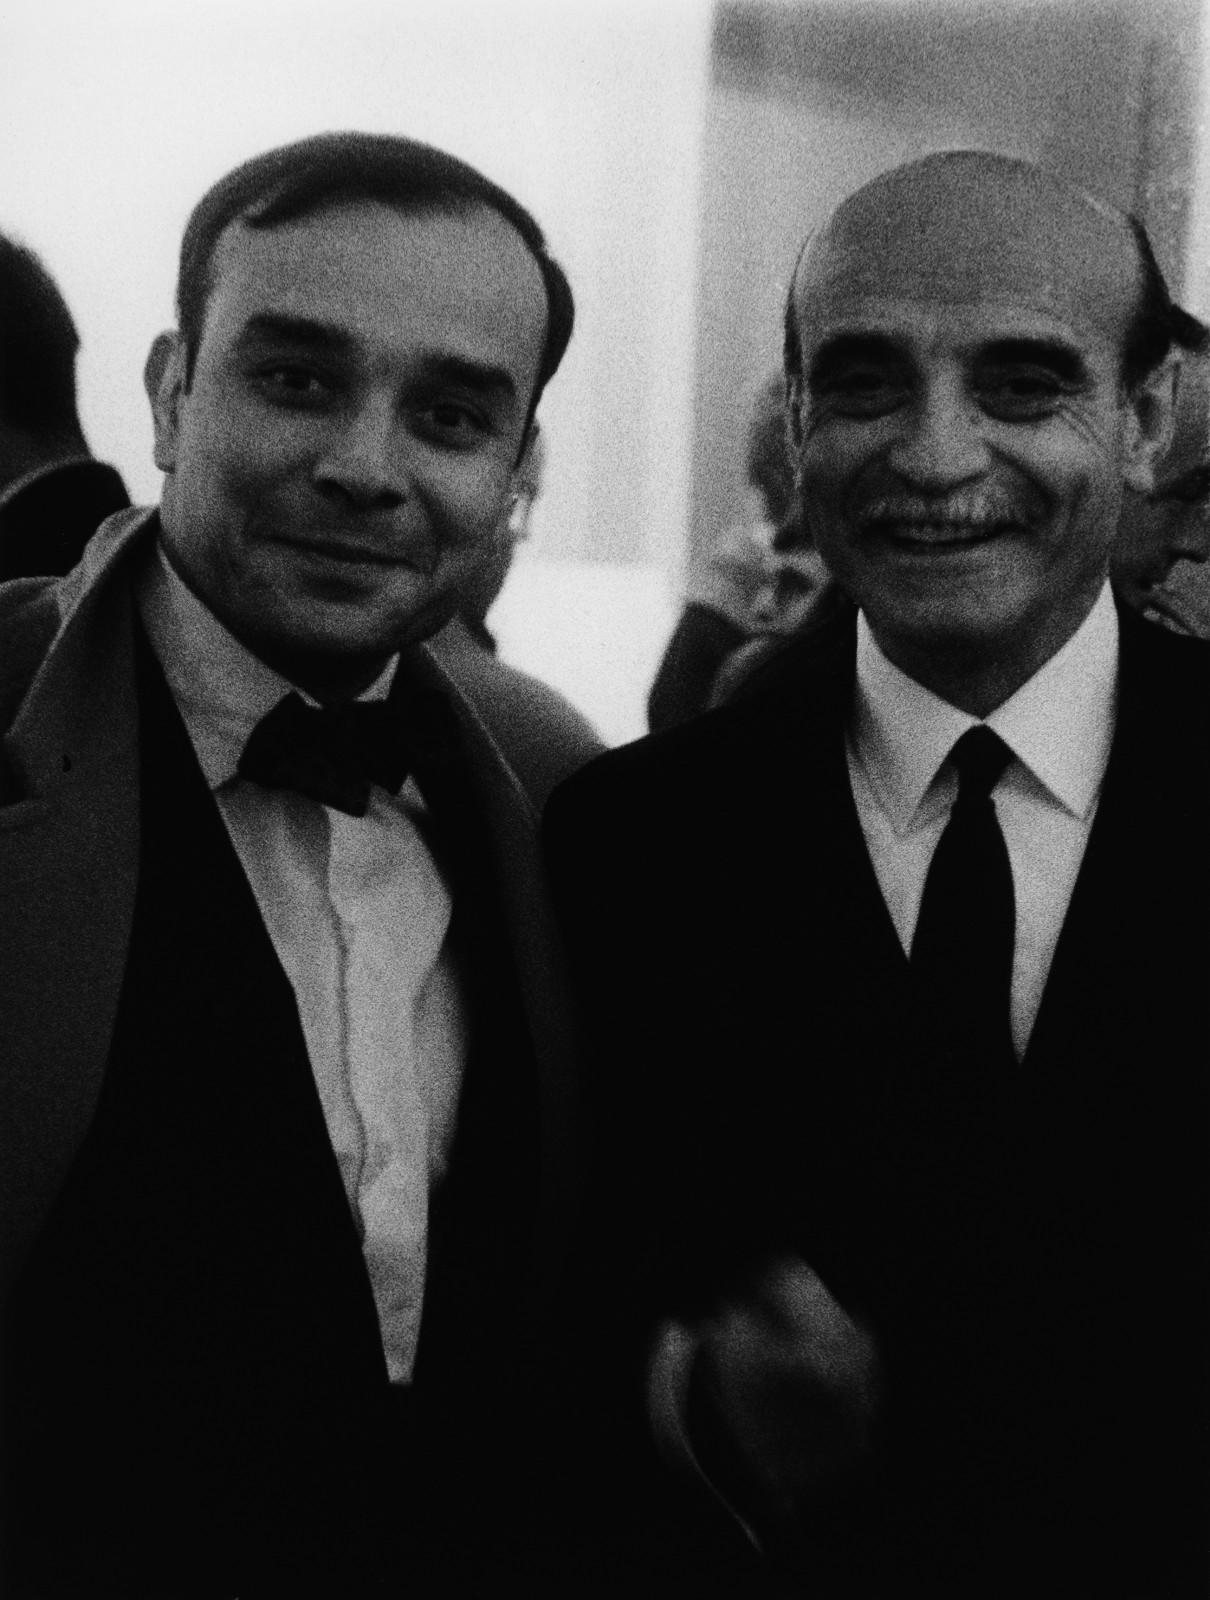 Yves Klein and Lucio Fontana during the opening of the exhibition “Yves Klein Propositions Monochromes”, Galerie Rive Drote